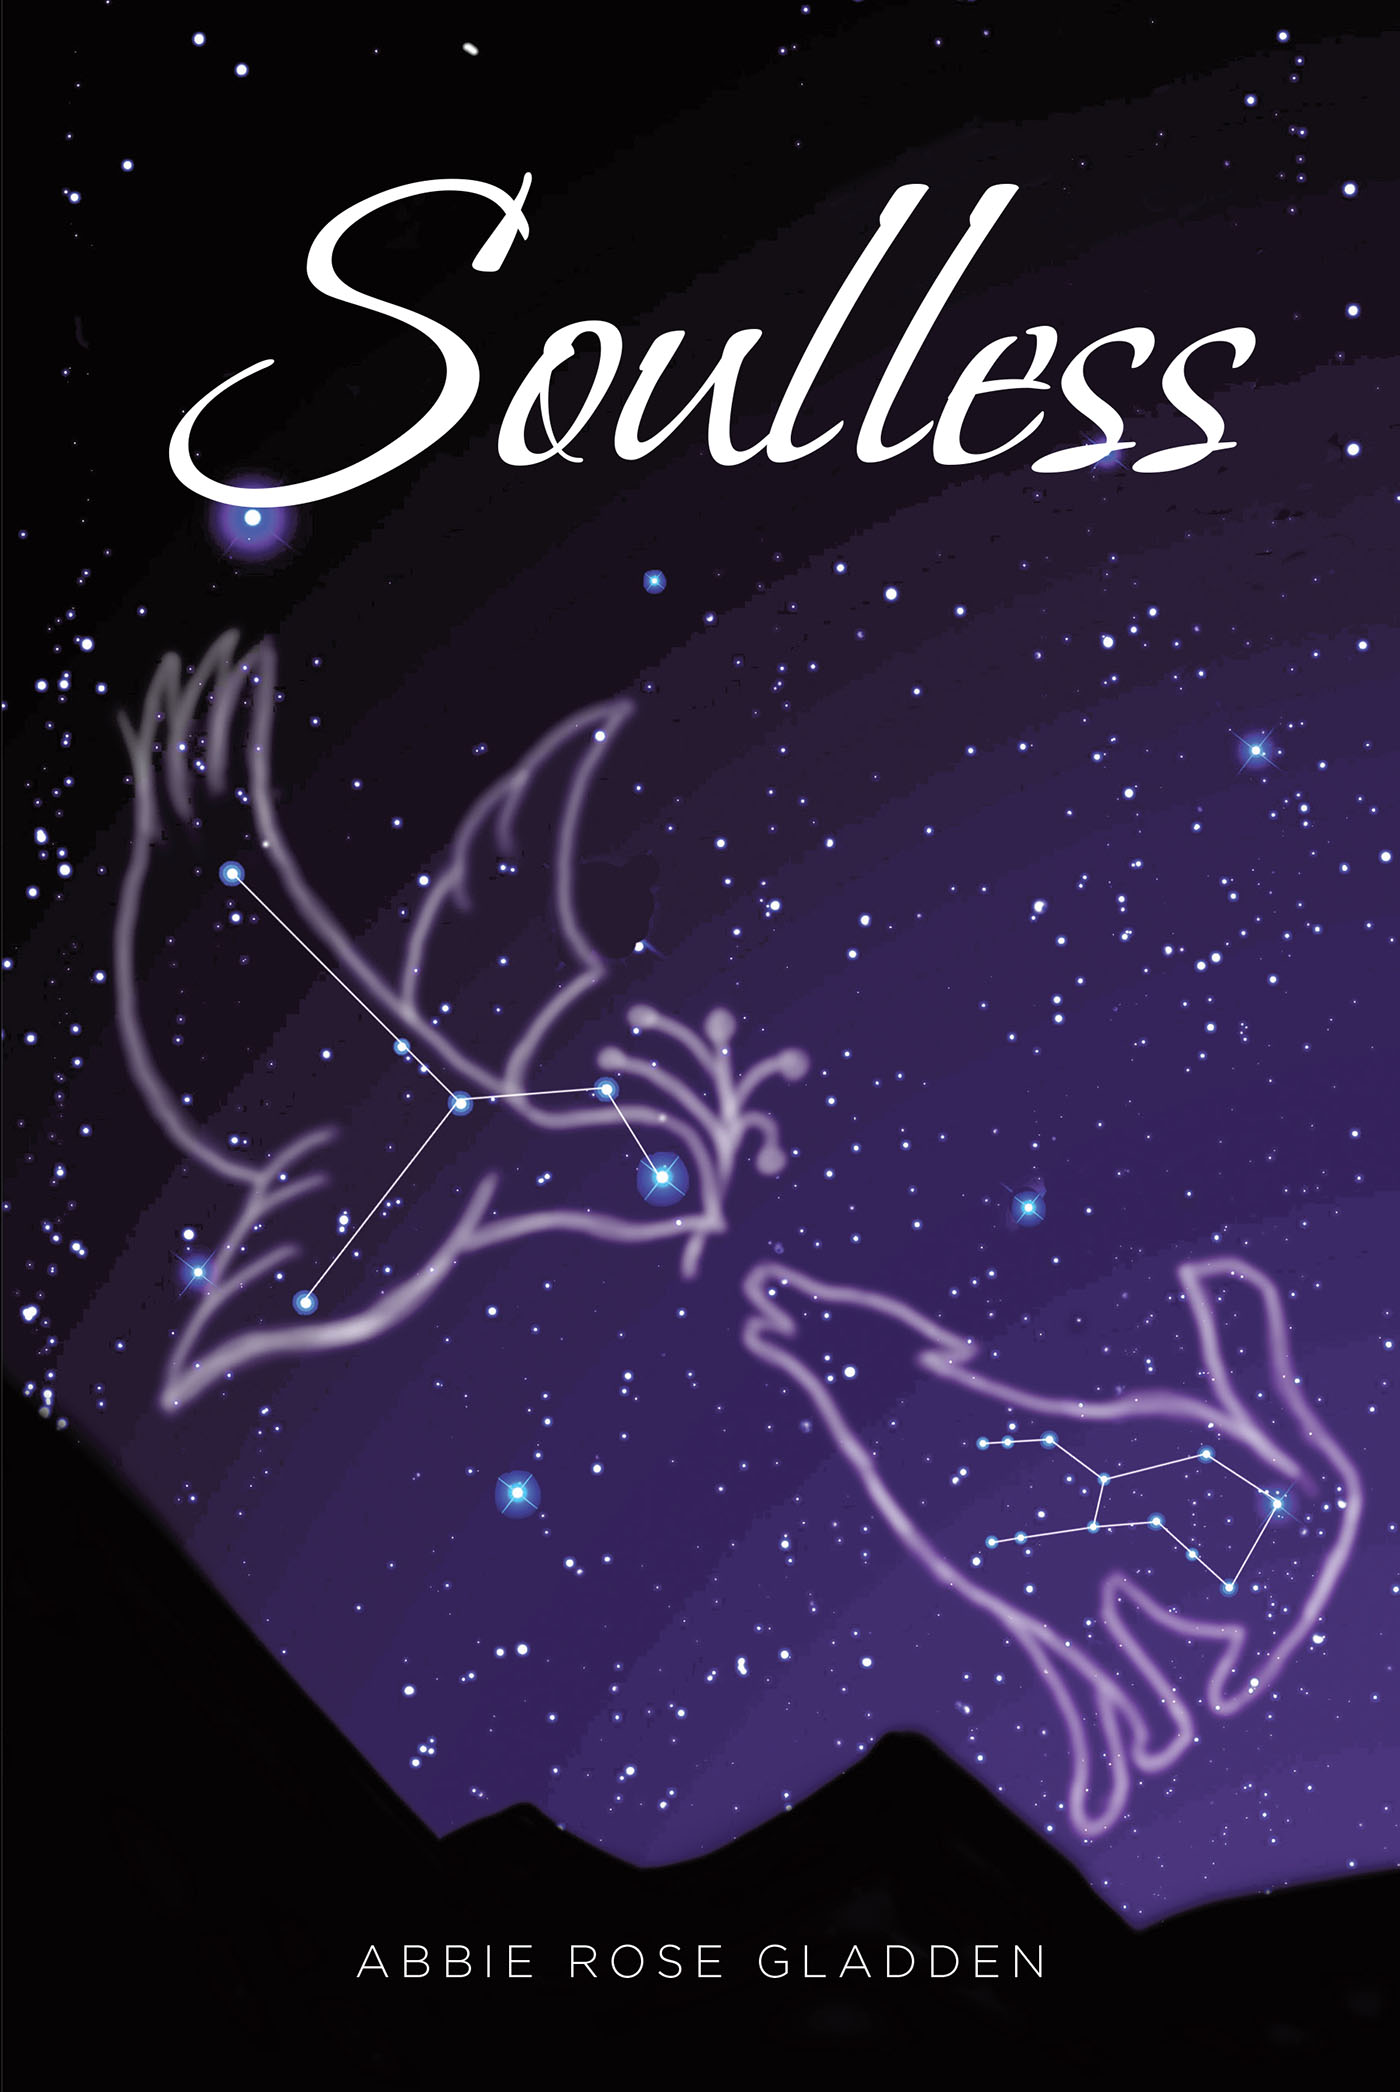 Author Abbie Rose Gladden’s New Book, "Soulless," Shares the Message That One Girl Can Change the Outcome of a War That Has Been Fought for Millennia